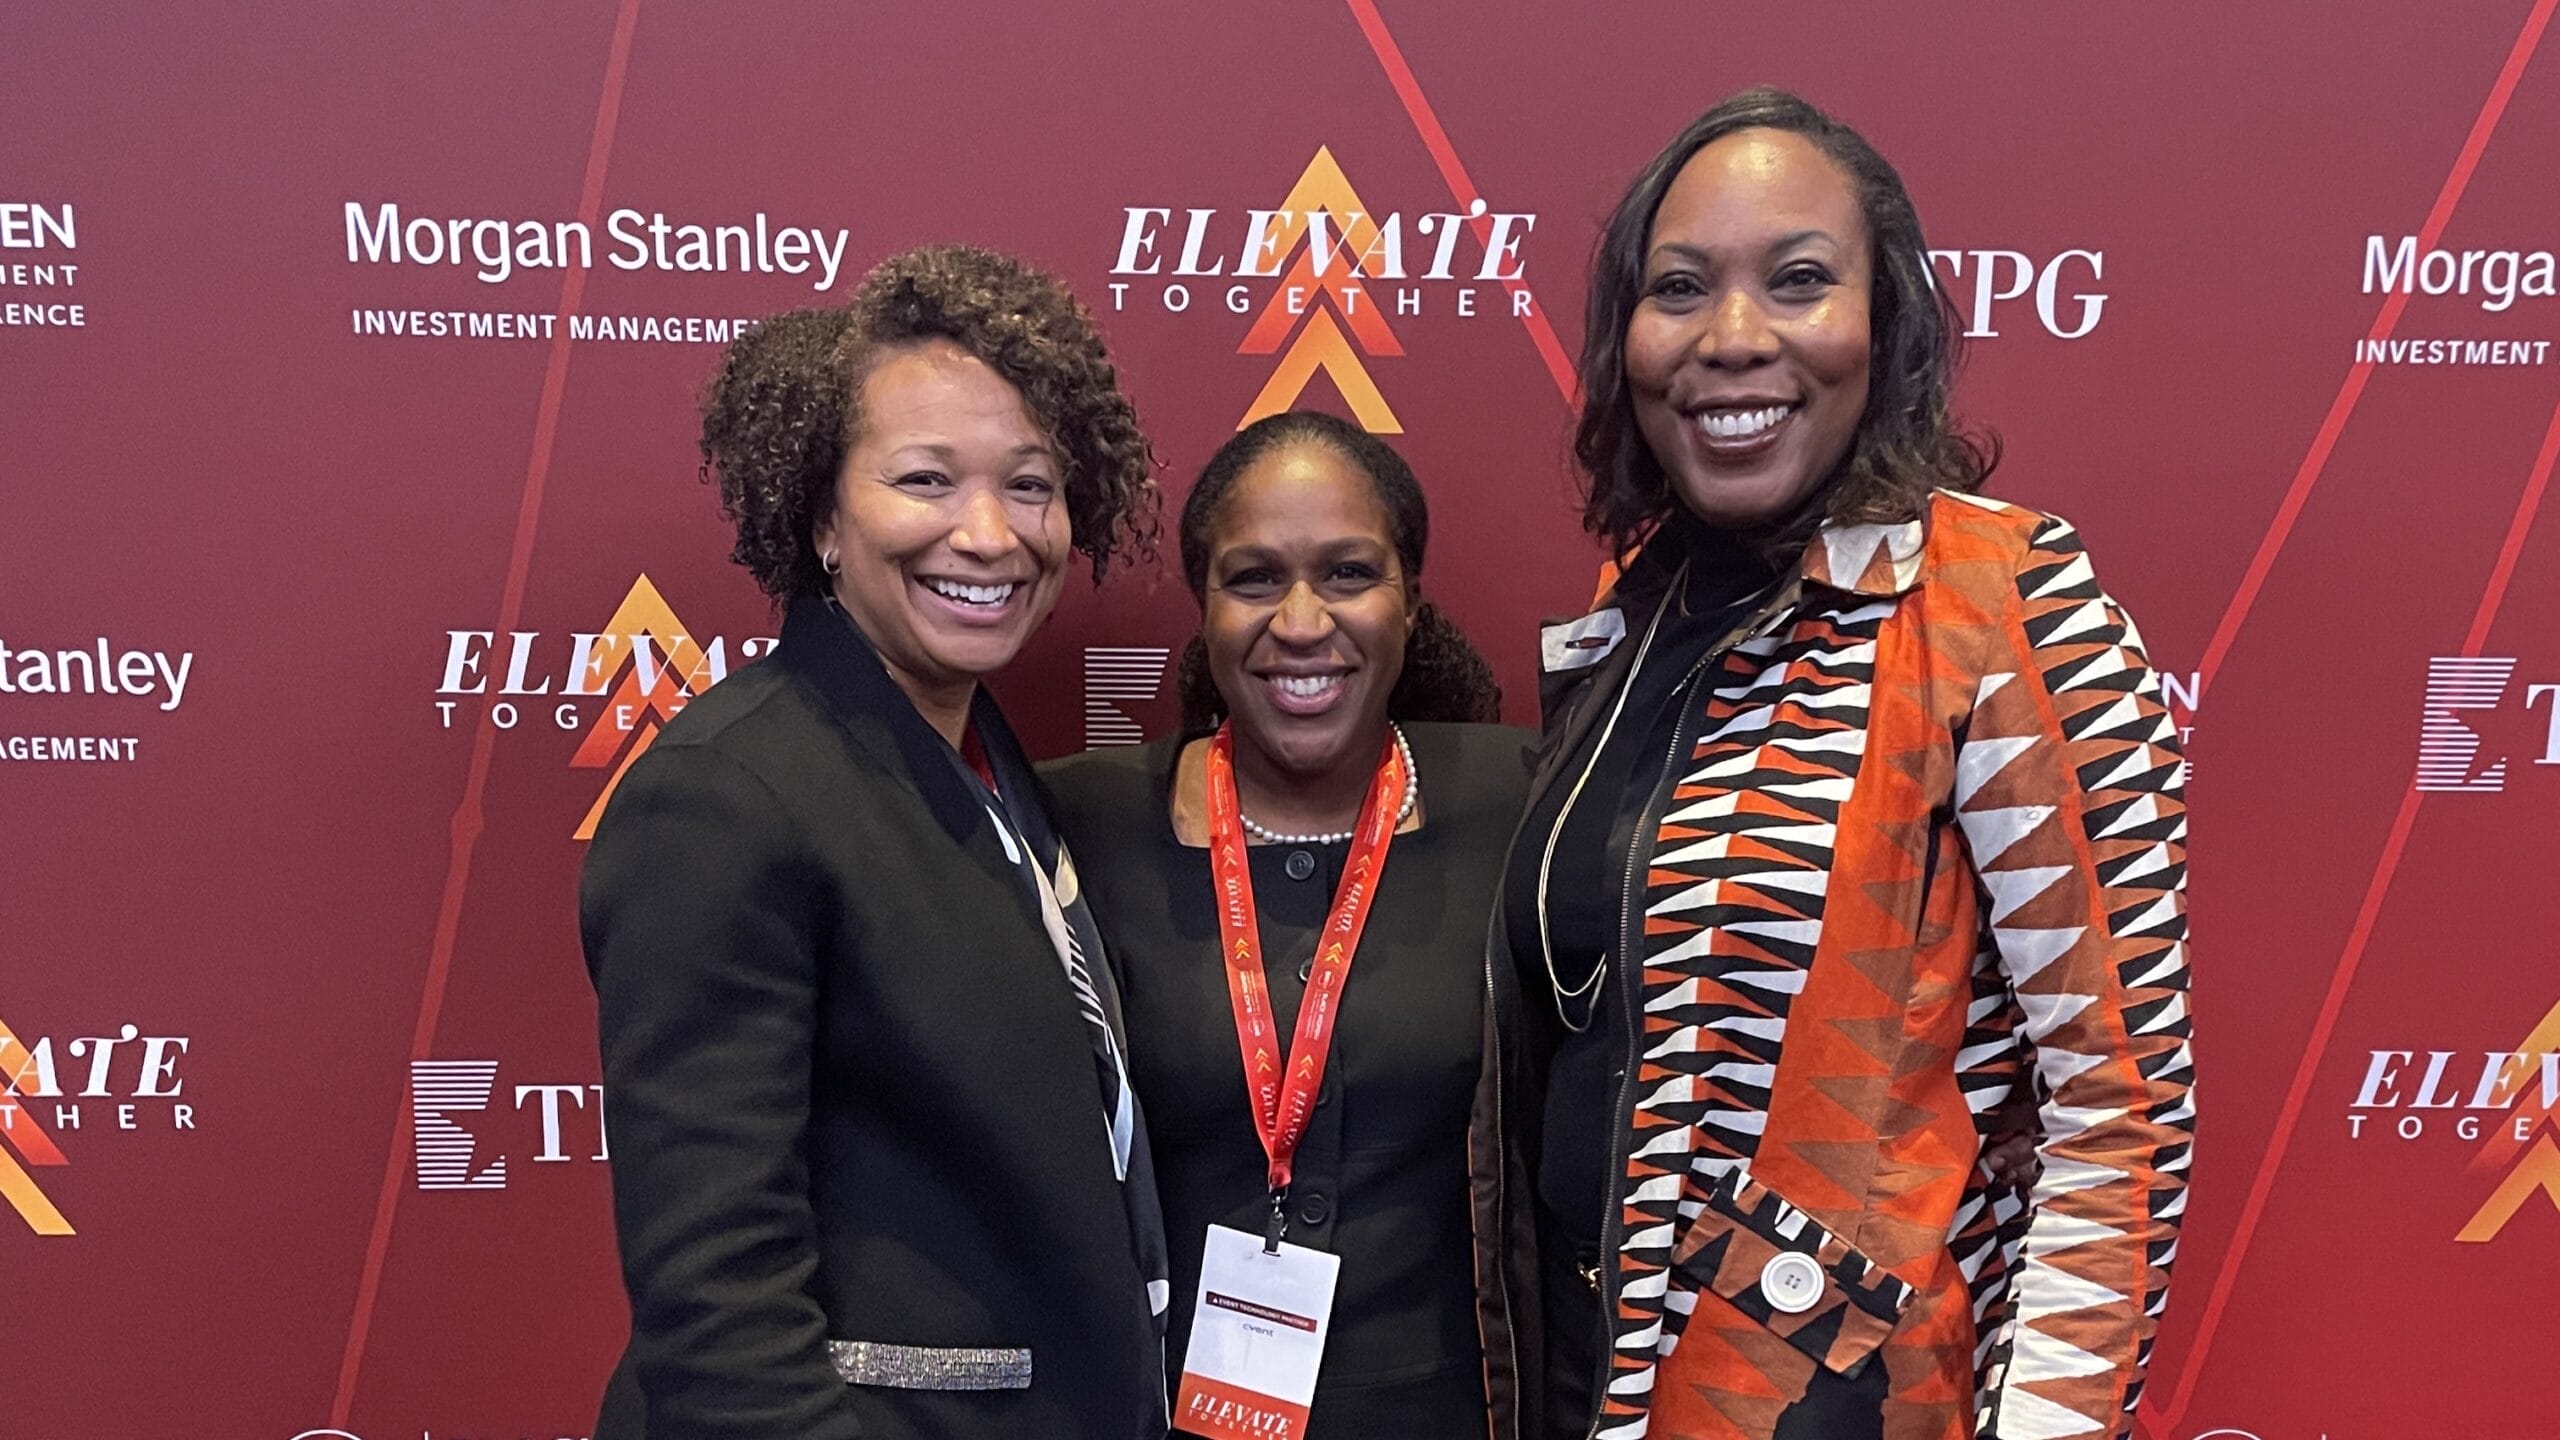 Three women in business attire pose together for a photo in front of a red backdrop.